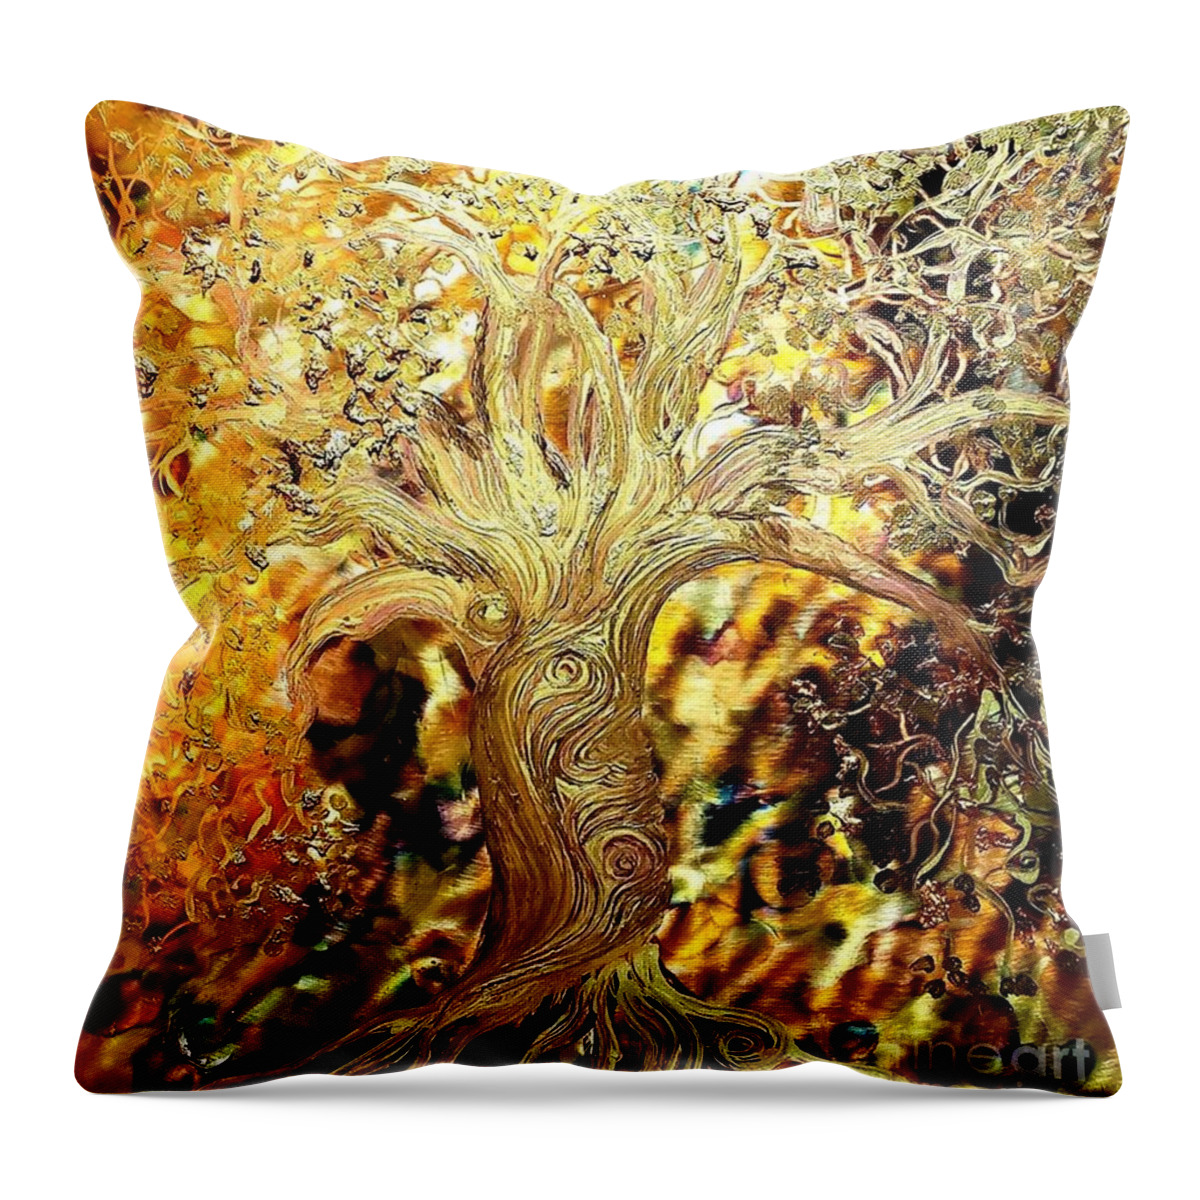 Burning Bush Throw Pillow featuring the painting Burning Bush by Stefan Duncan